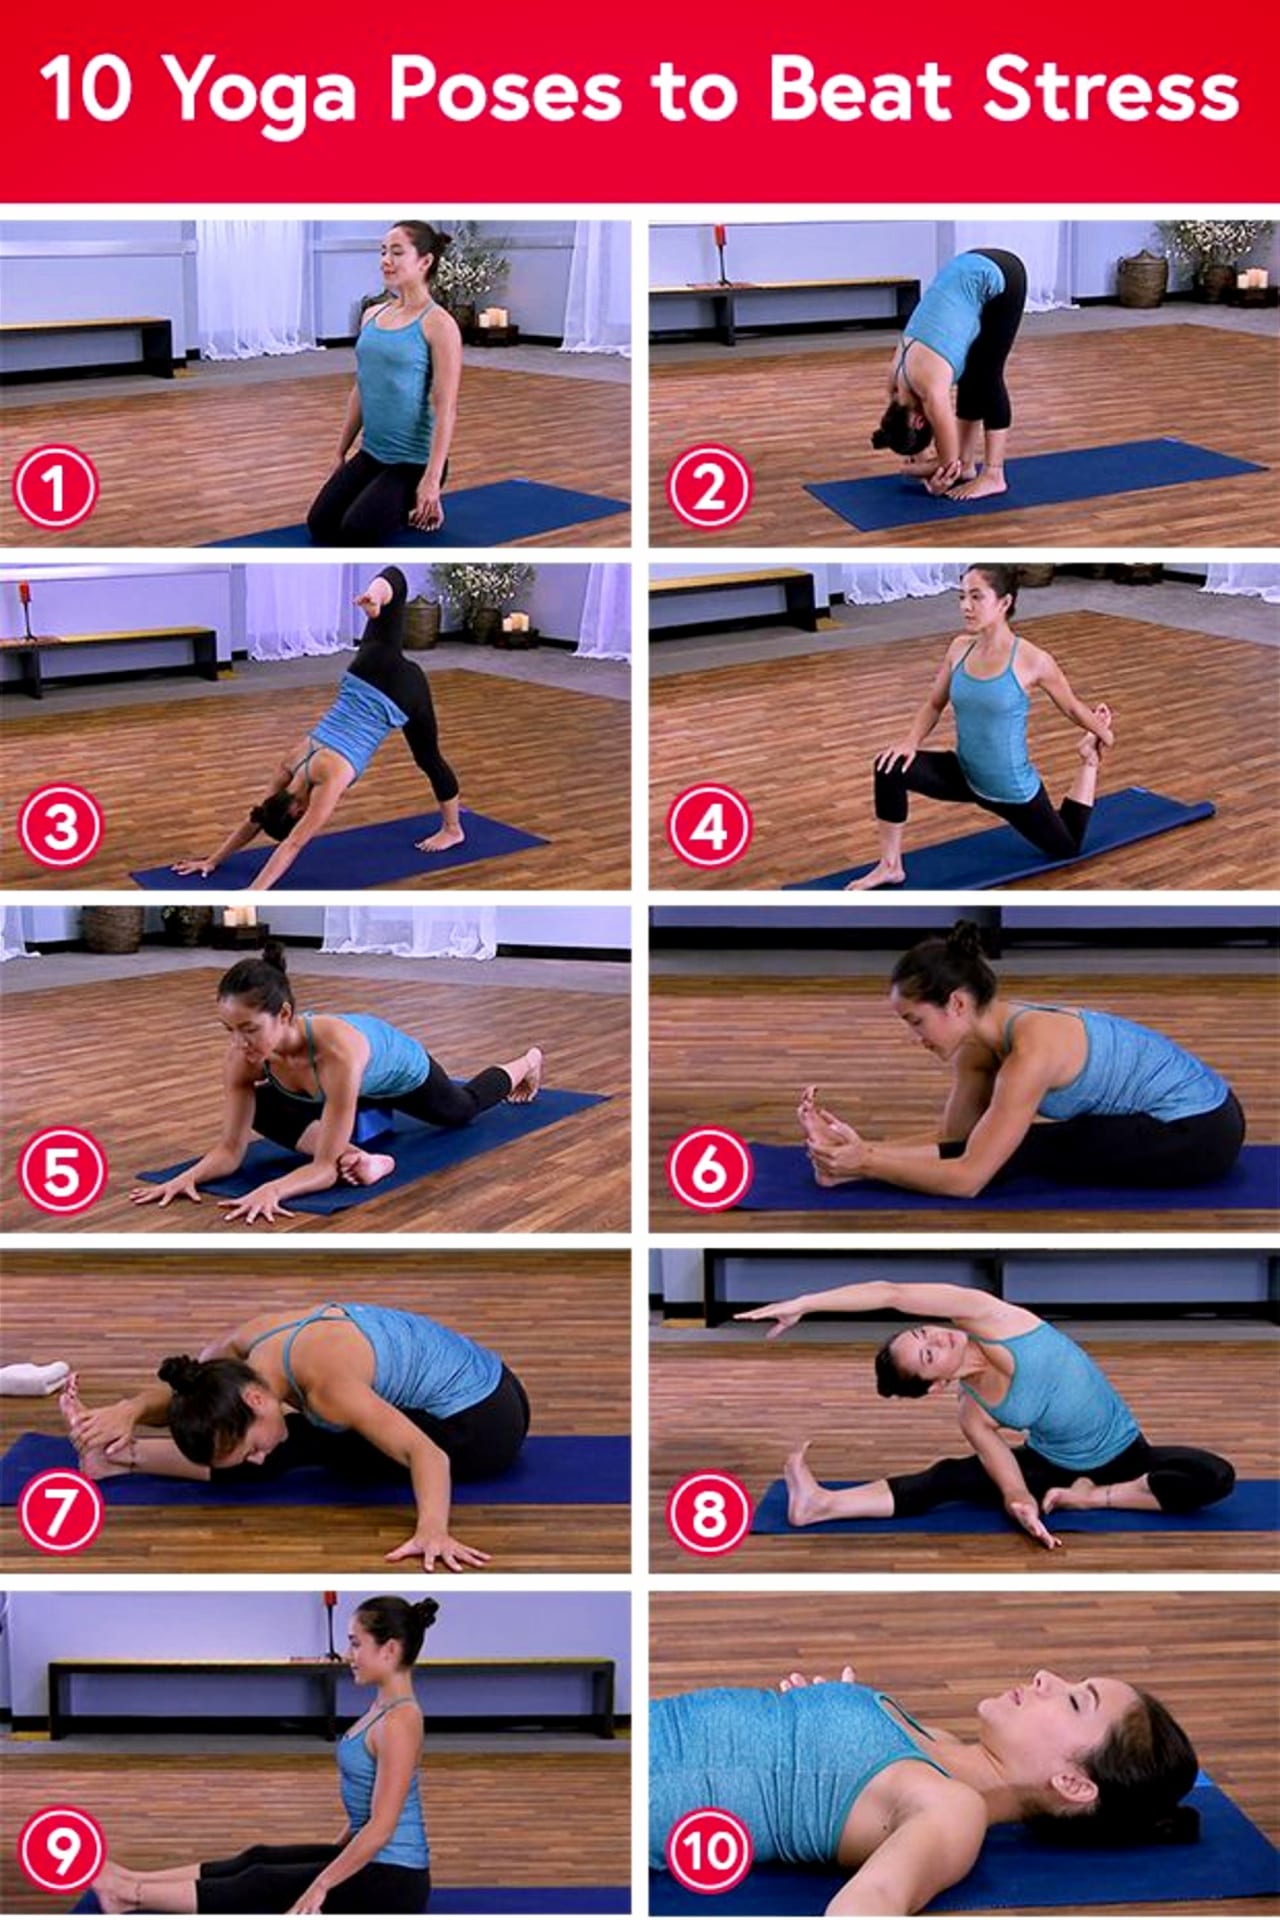 Easy Yoga Poses for Stressed Out Moms - Yoga Poses for ...